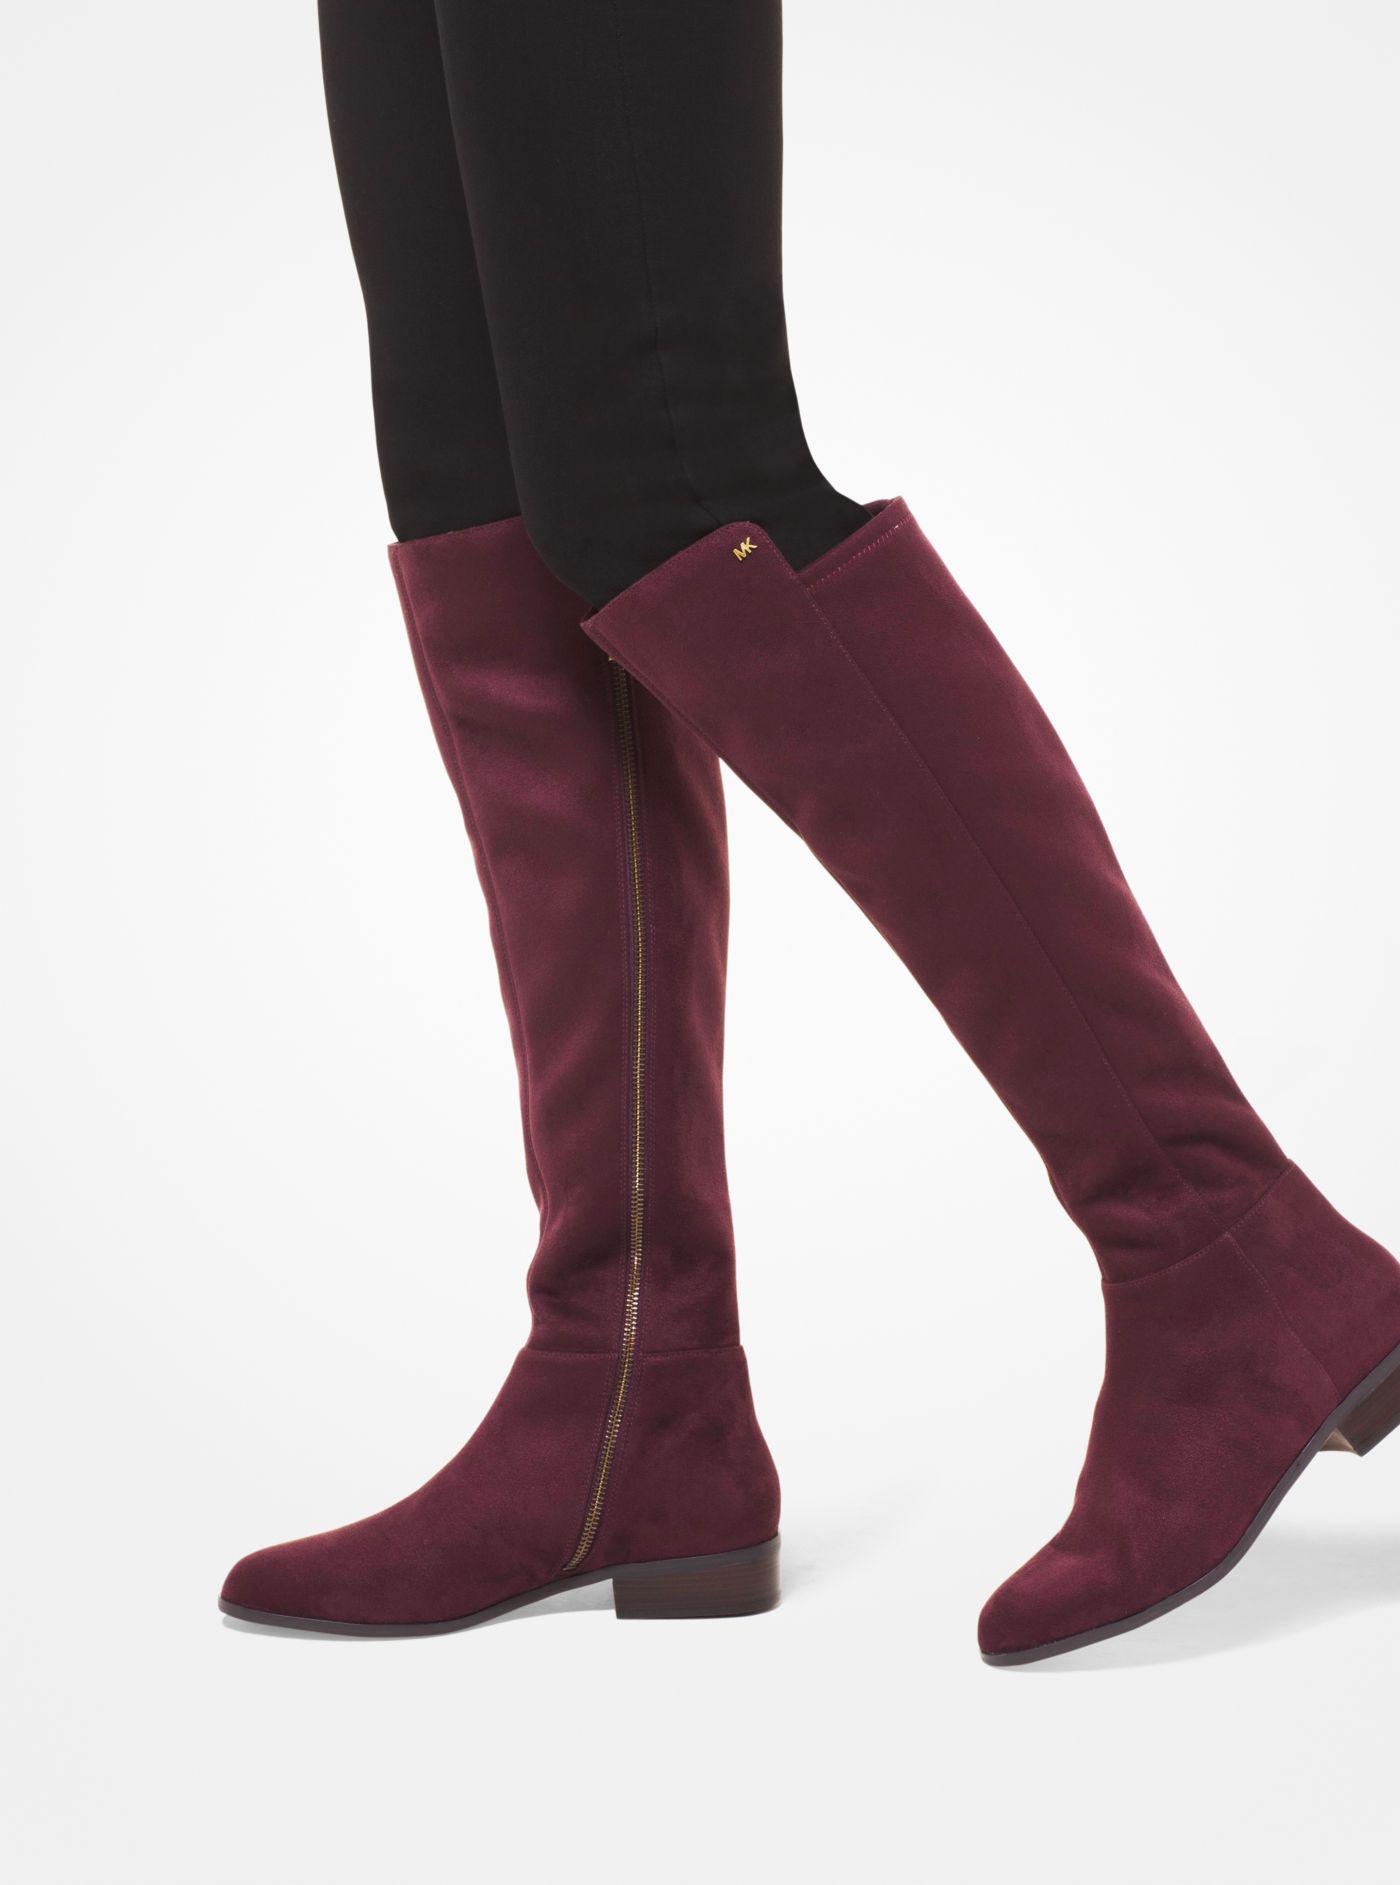 Michael Kors Suede Michael Bromley Riding Boots in Damson (Red) - Lyst